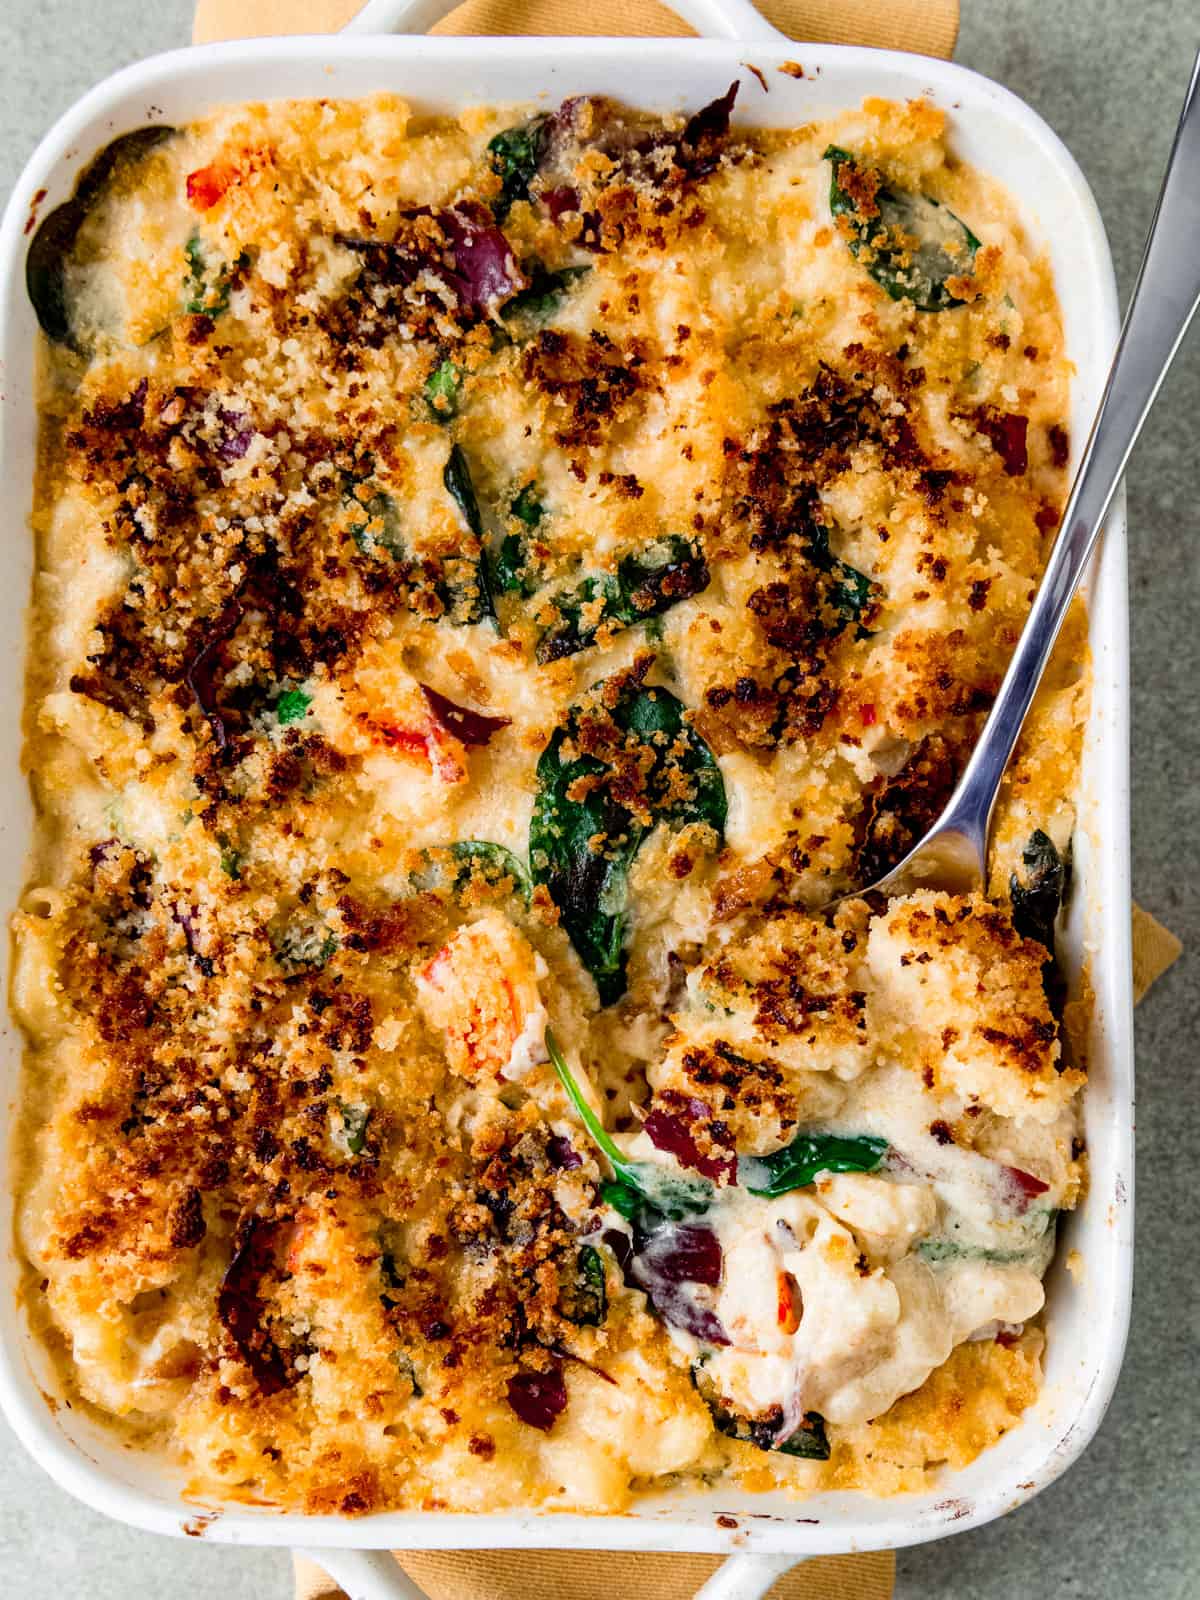 Creamy lobster mac and cheese with spinach, crispy prosciutto and panko breadcrumb topping.